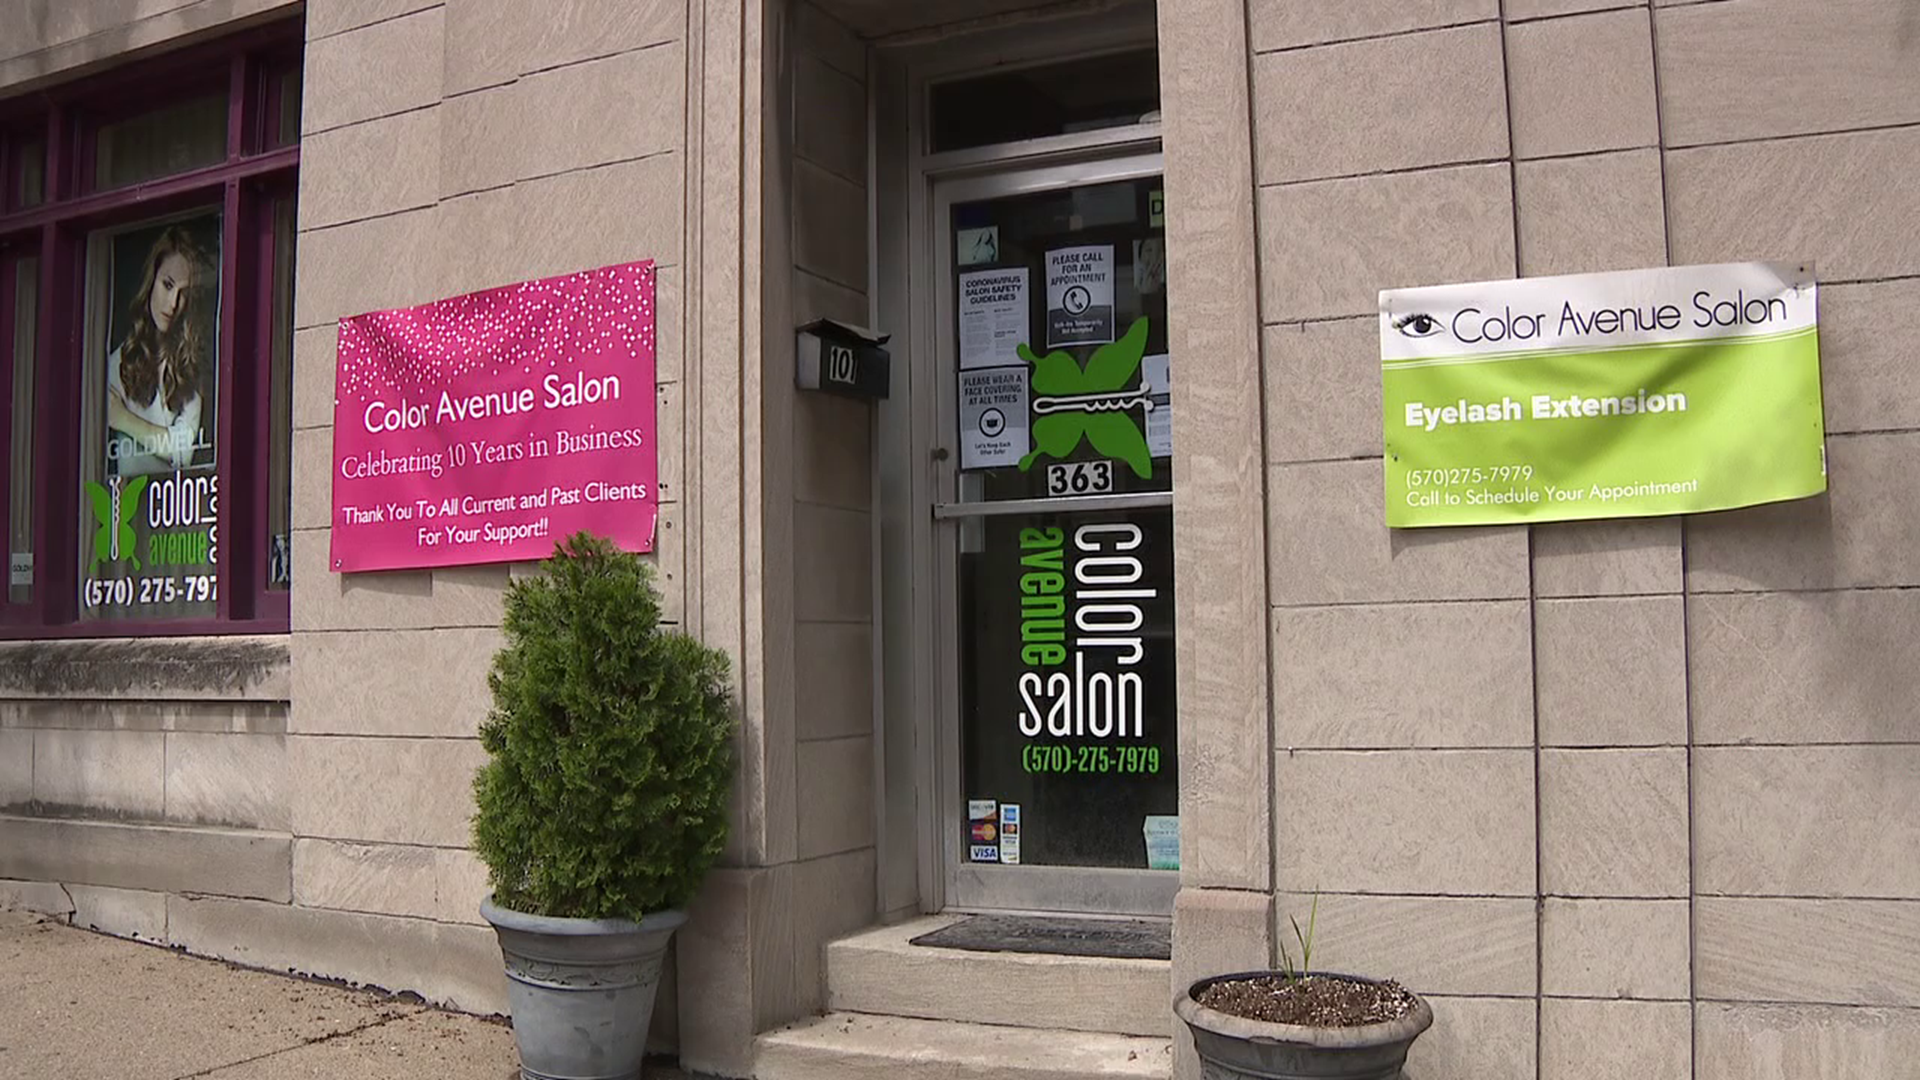 It's been a long ten weeks for hairdressers and their clients.